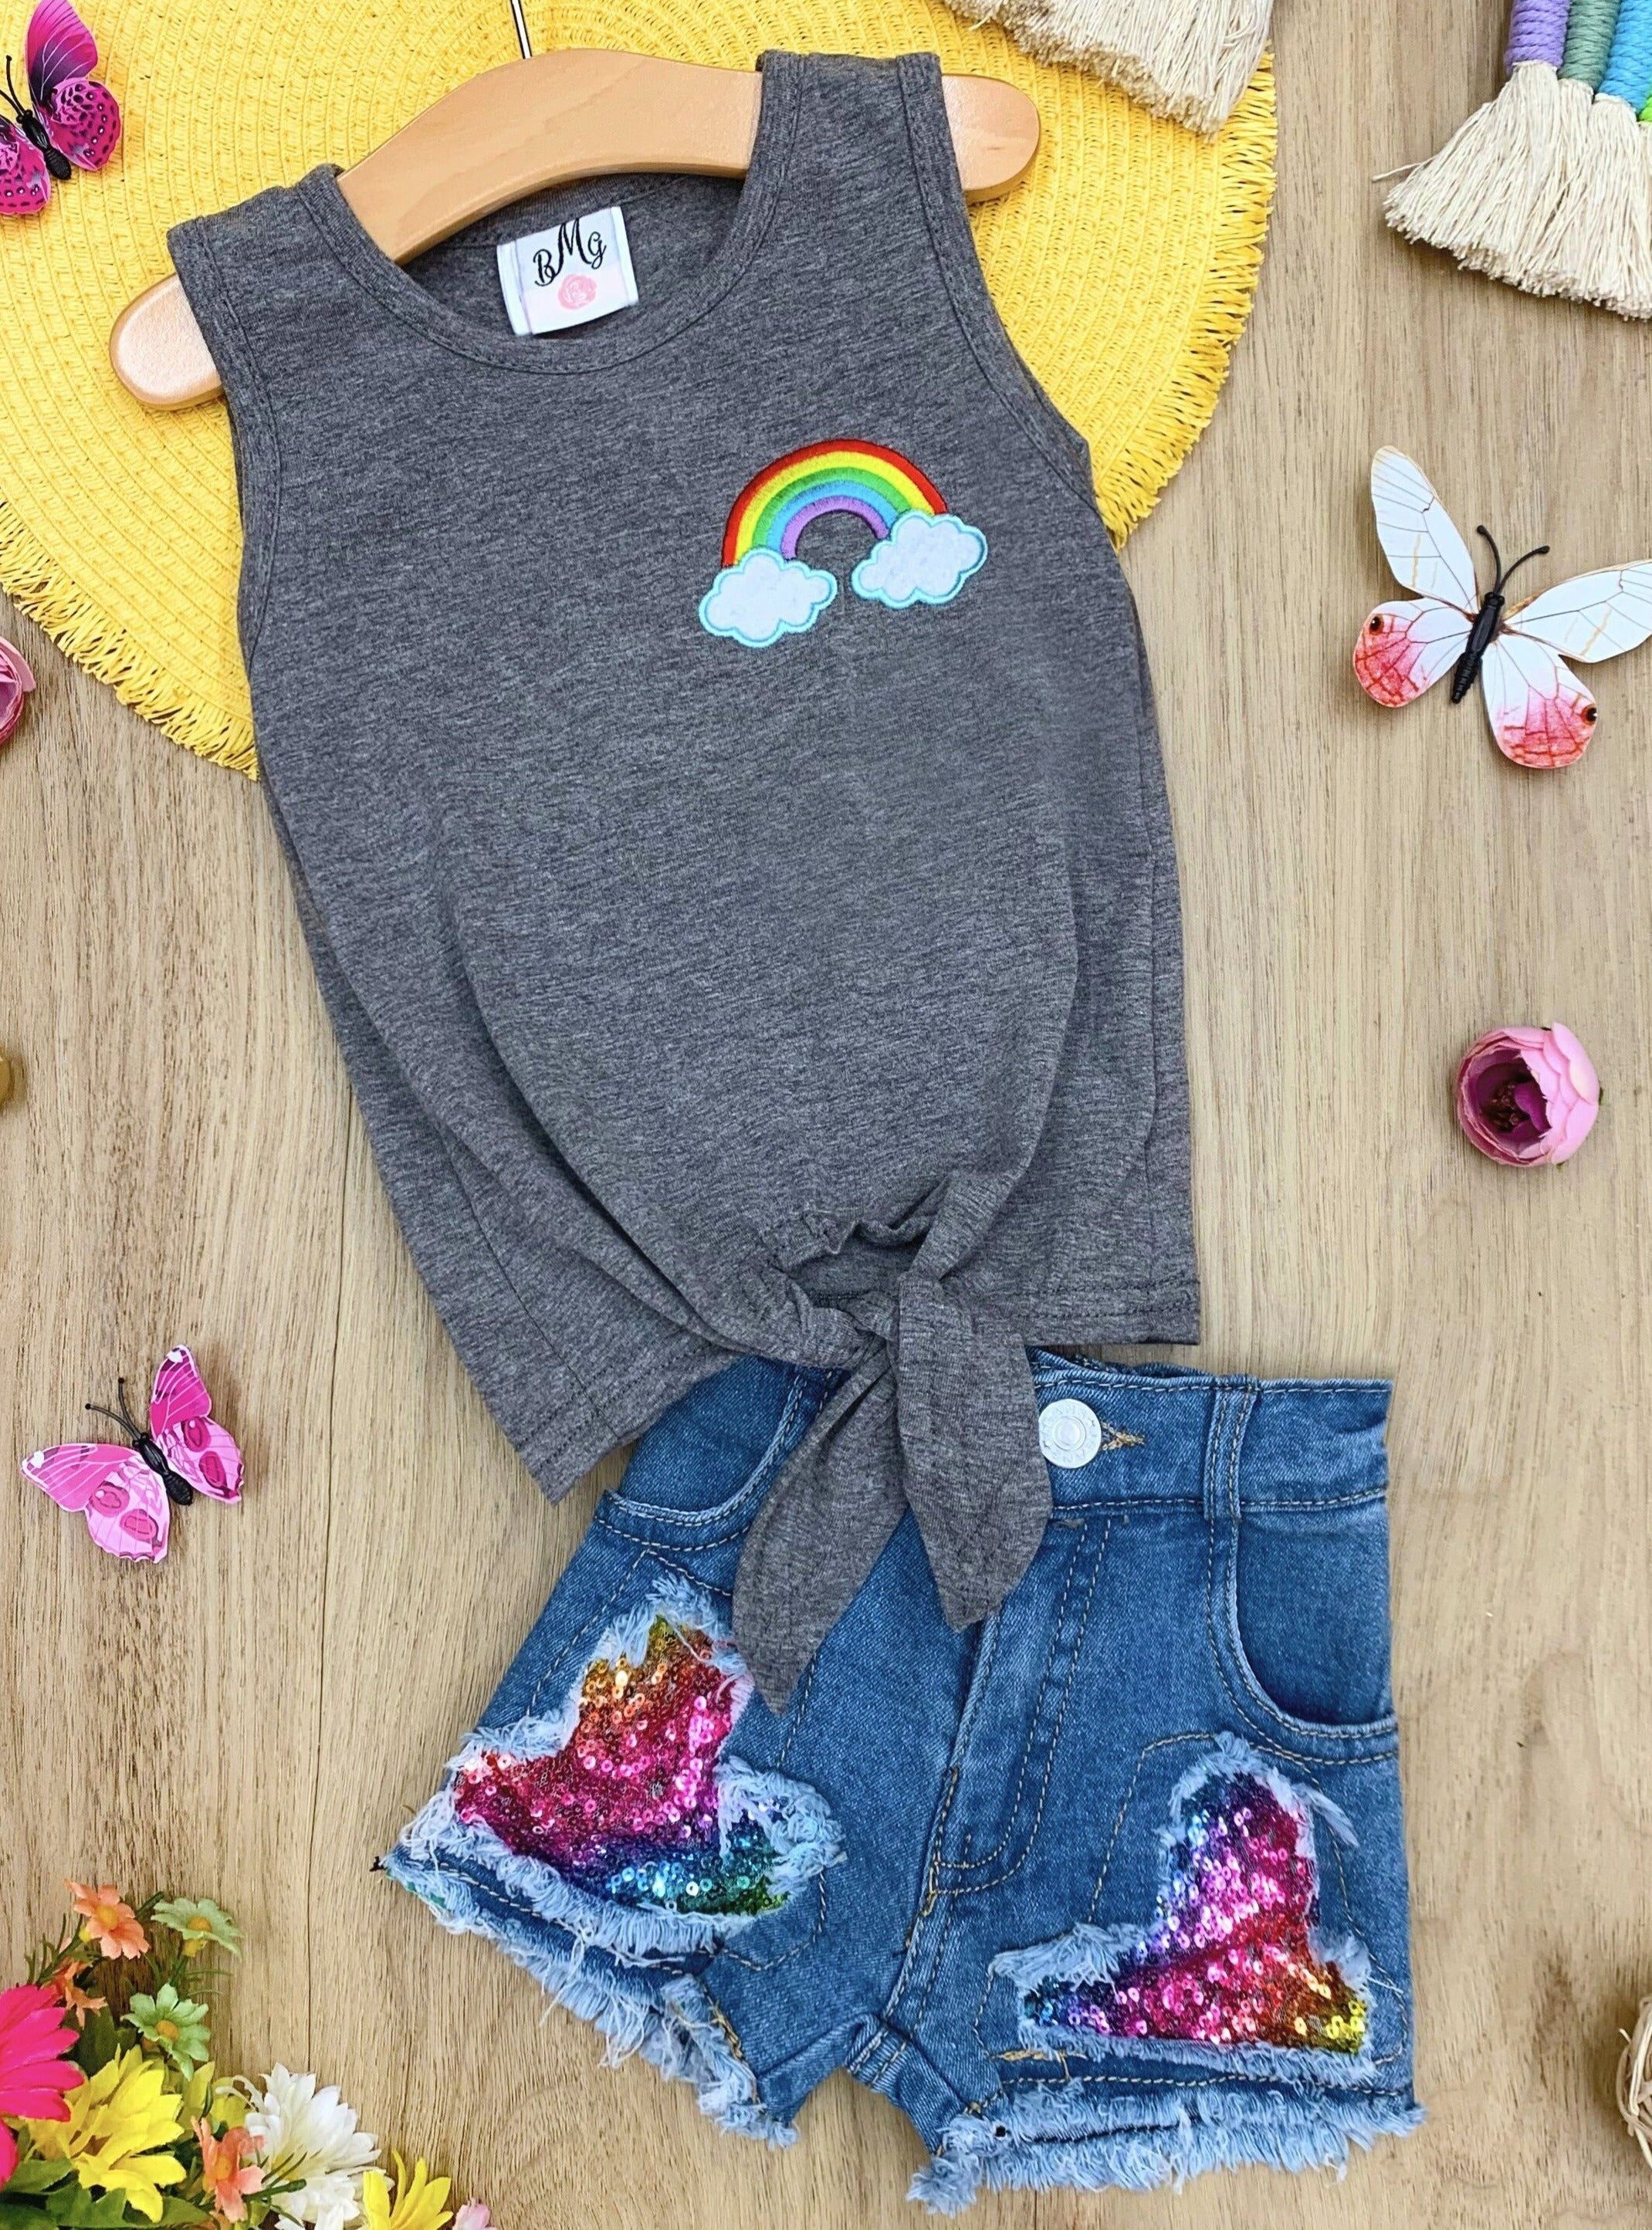 Toddler Spring Outfits | Girls Rainbow Knot Top & Sequin Denim Shorts ...